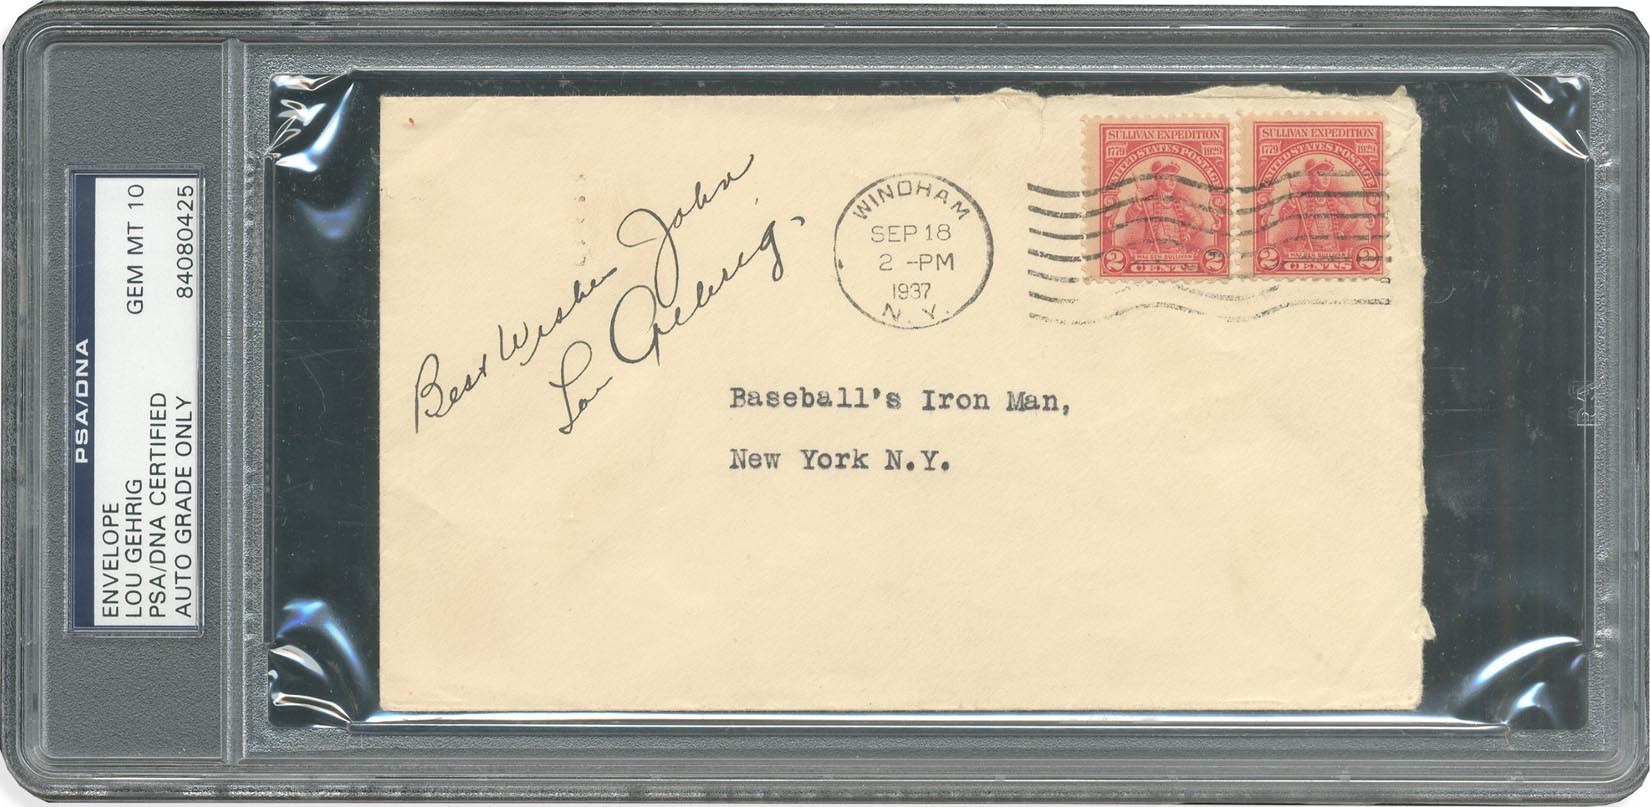 Ruth and Gehrig - 1937 Lou Gehrig Envelope Addressed Merely to "Baseball's Iron Man" That Got There! (PSA/DNA 10)